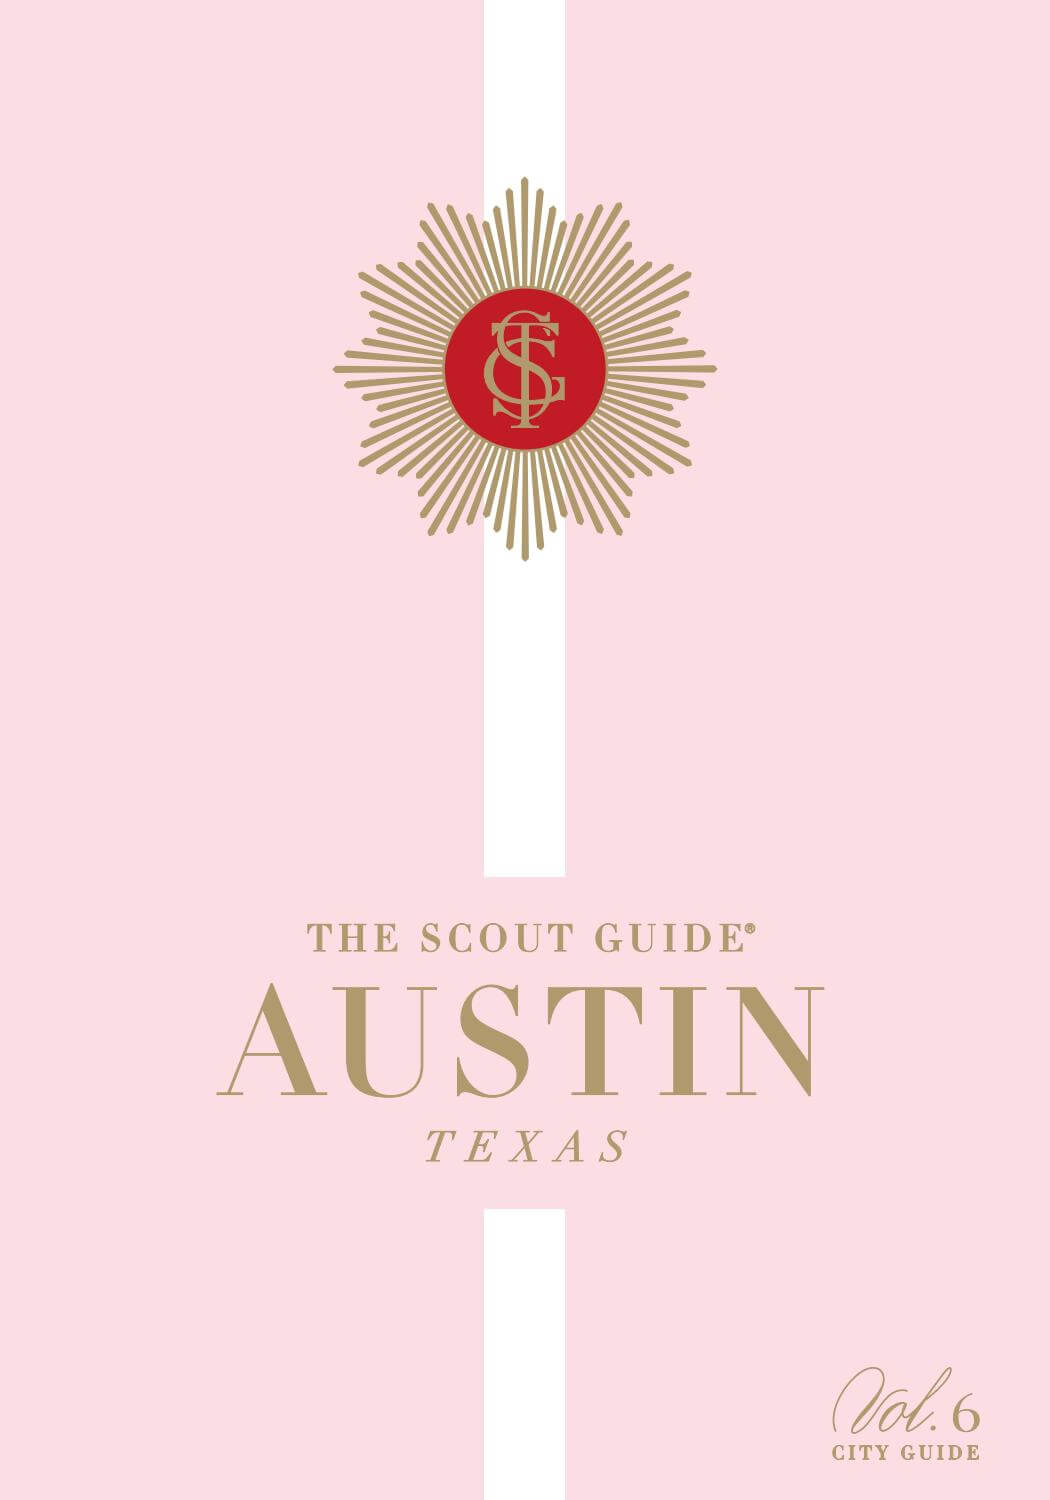 The Scout Guide Austin cover